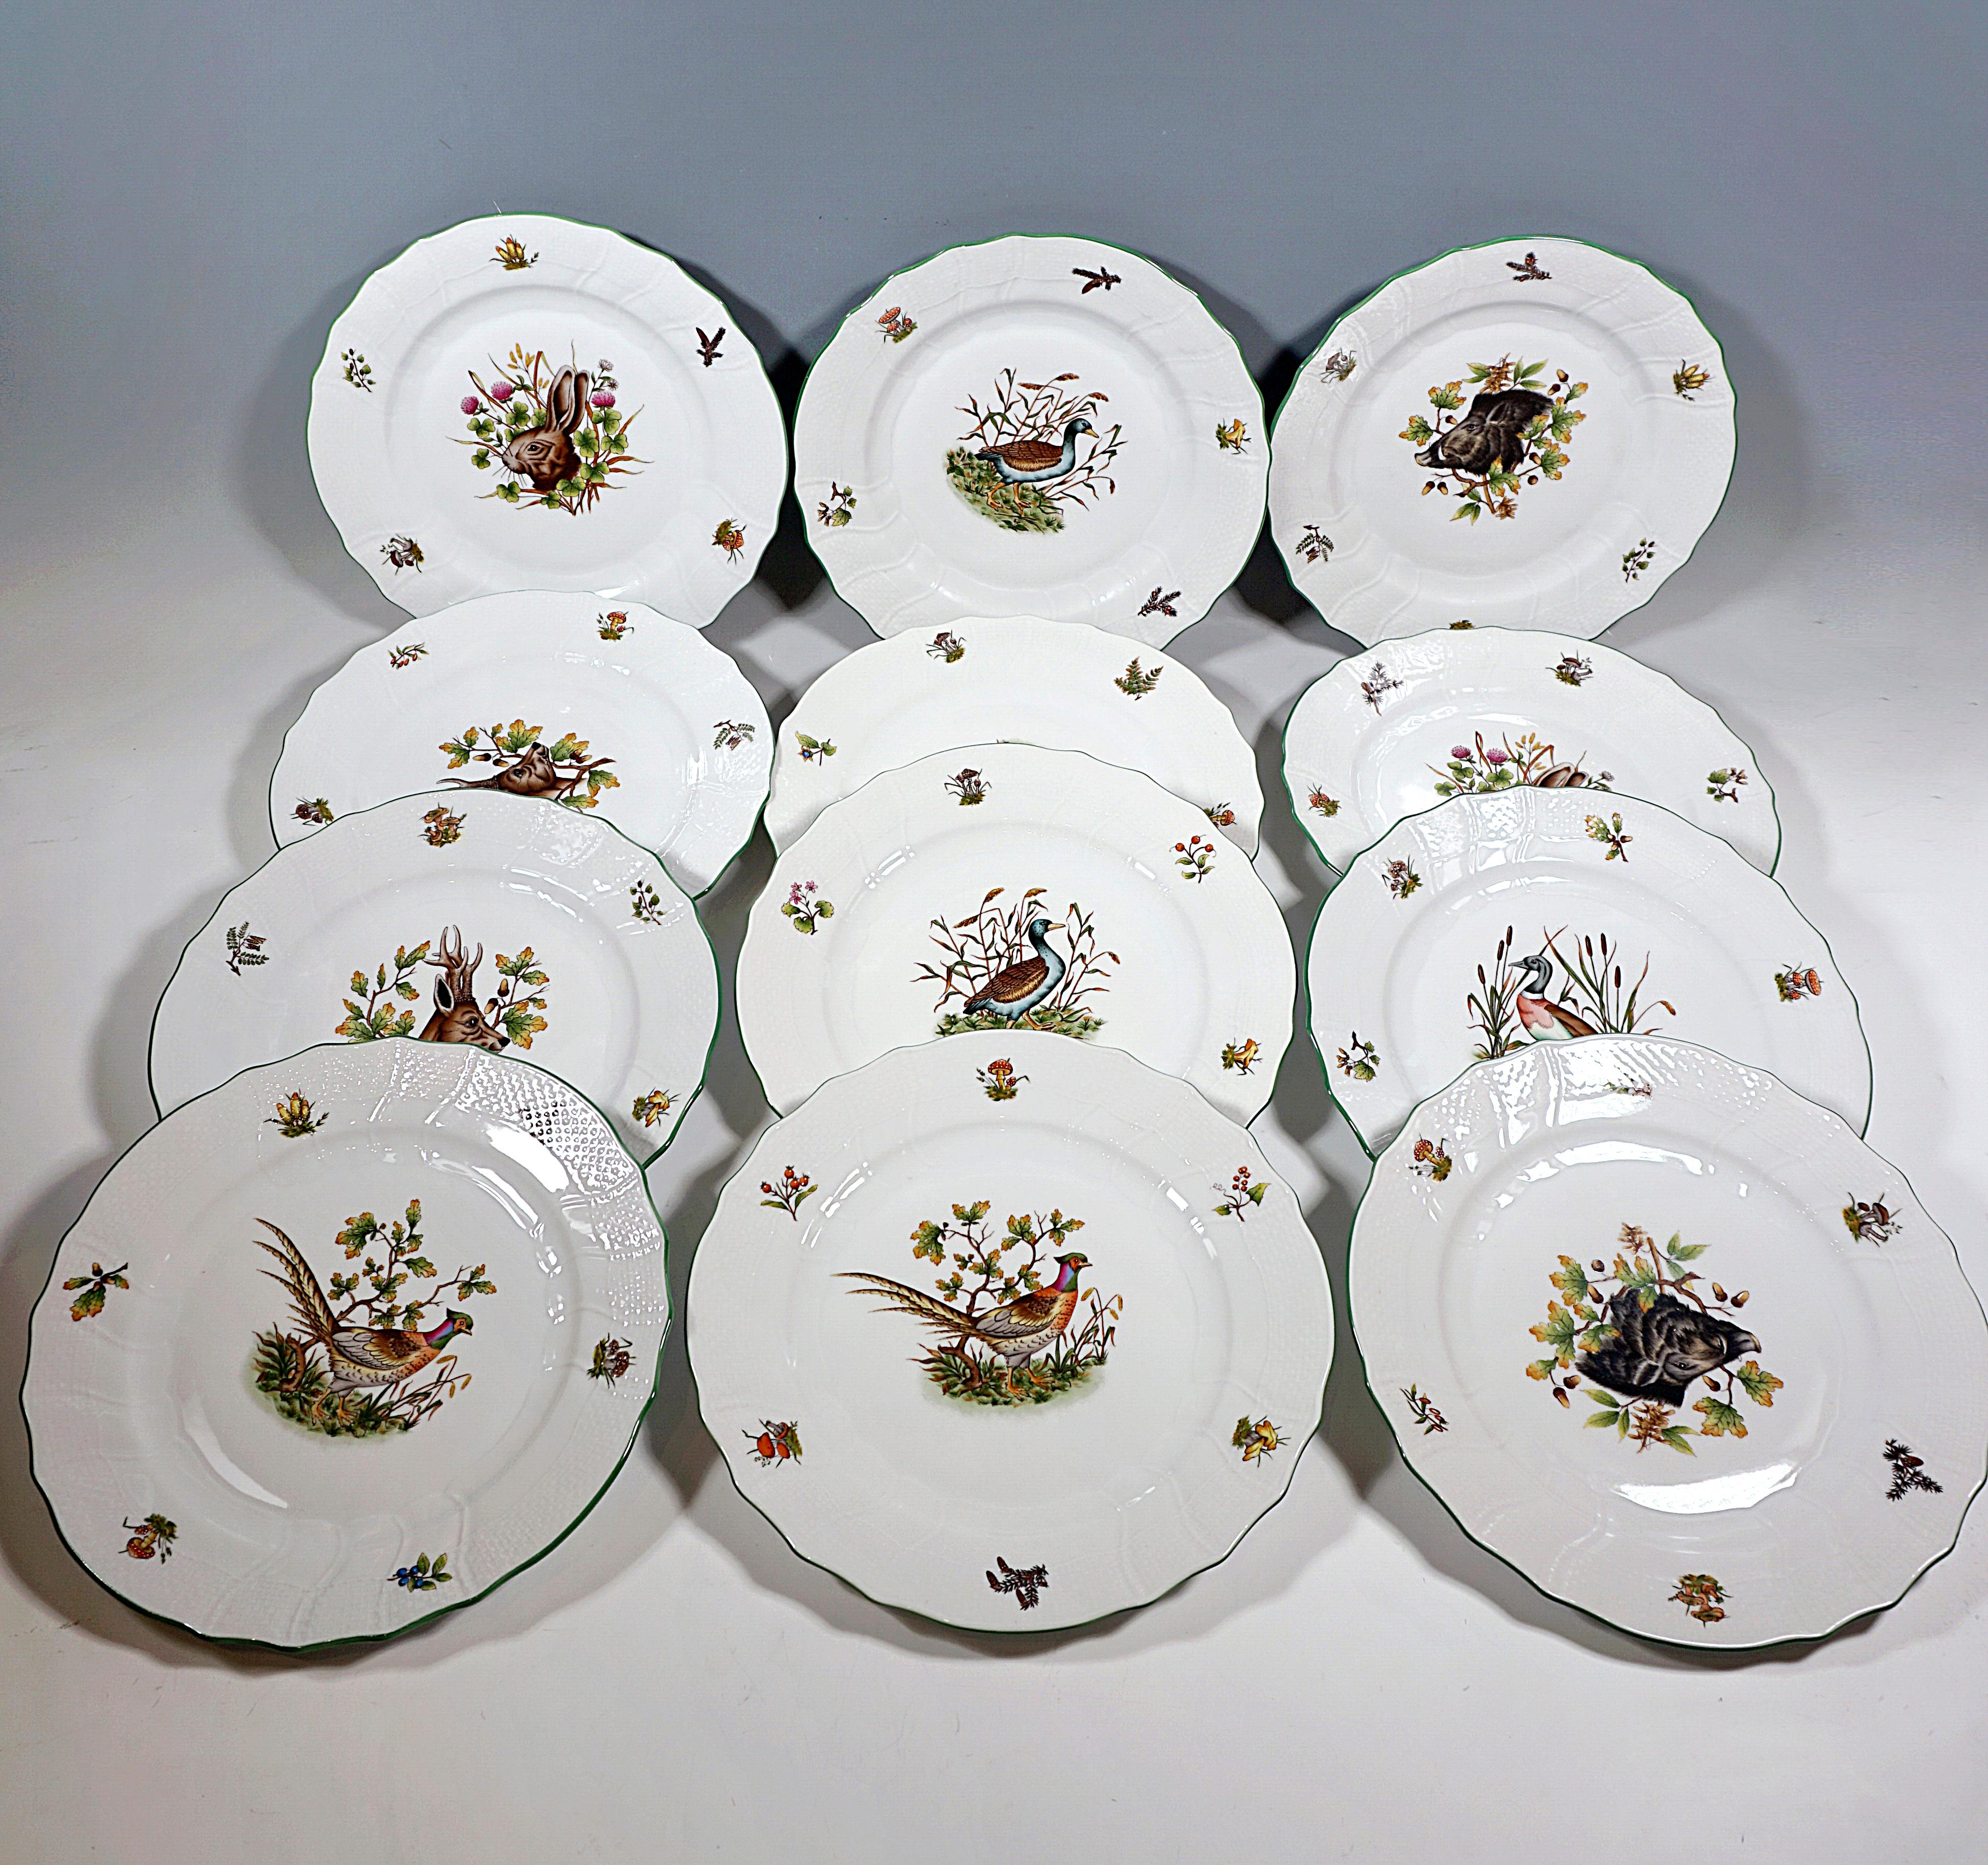 Hungarian Dinner Set For 12 Persons 'Classic Hunter Trophies' Herend Hungary, 20th Century